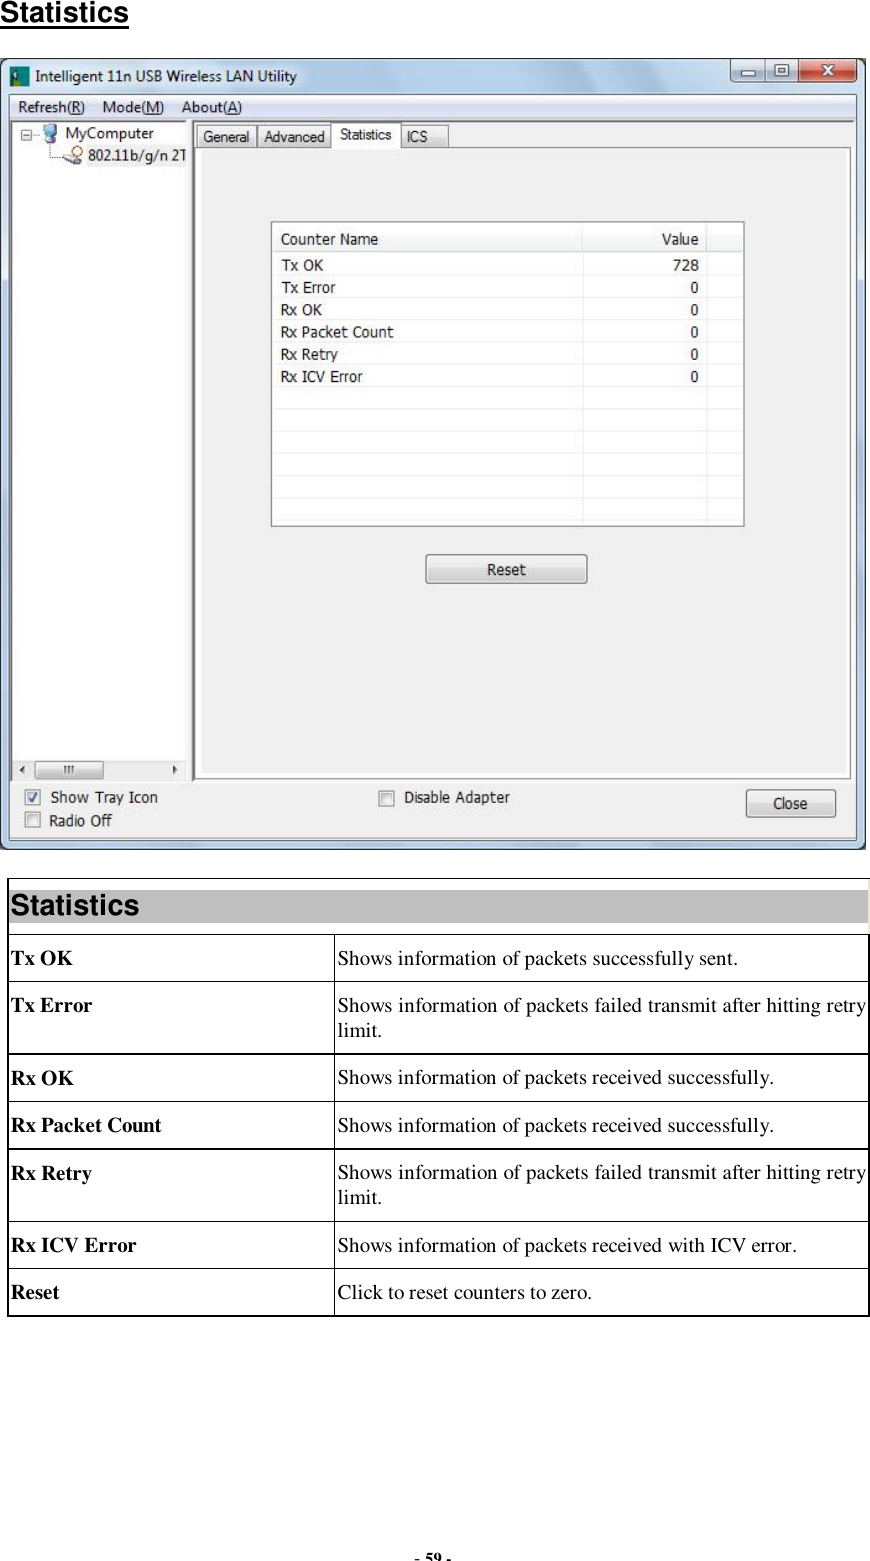  - 59 - Statistics  Statistics Tx OK  Shows information of packets successfully sent. Tx Error  Shows information of packets failed transmit after hitting retry limit. Rx OK  Shows information of packets received successfully. Rx Packet Count  Shows information of packets received successfully. Rx Retry  Shows information of packets failed transmit after hitting retry limit. Rx ICV Error  Shows information of packets received with ICV error. Reset  Click to reset counters to zero.  